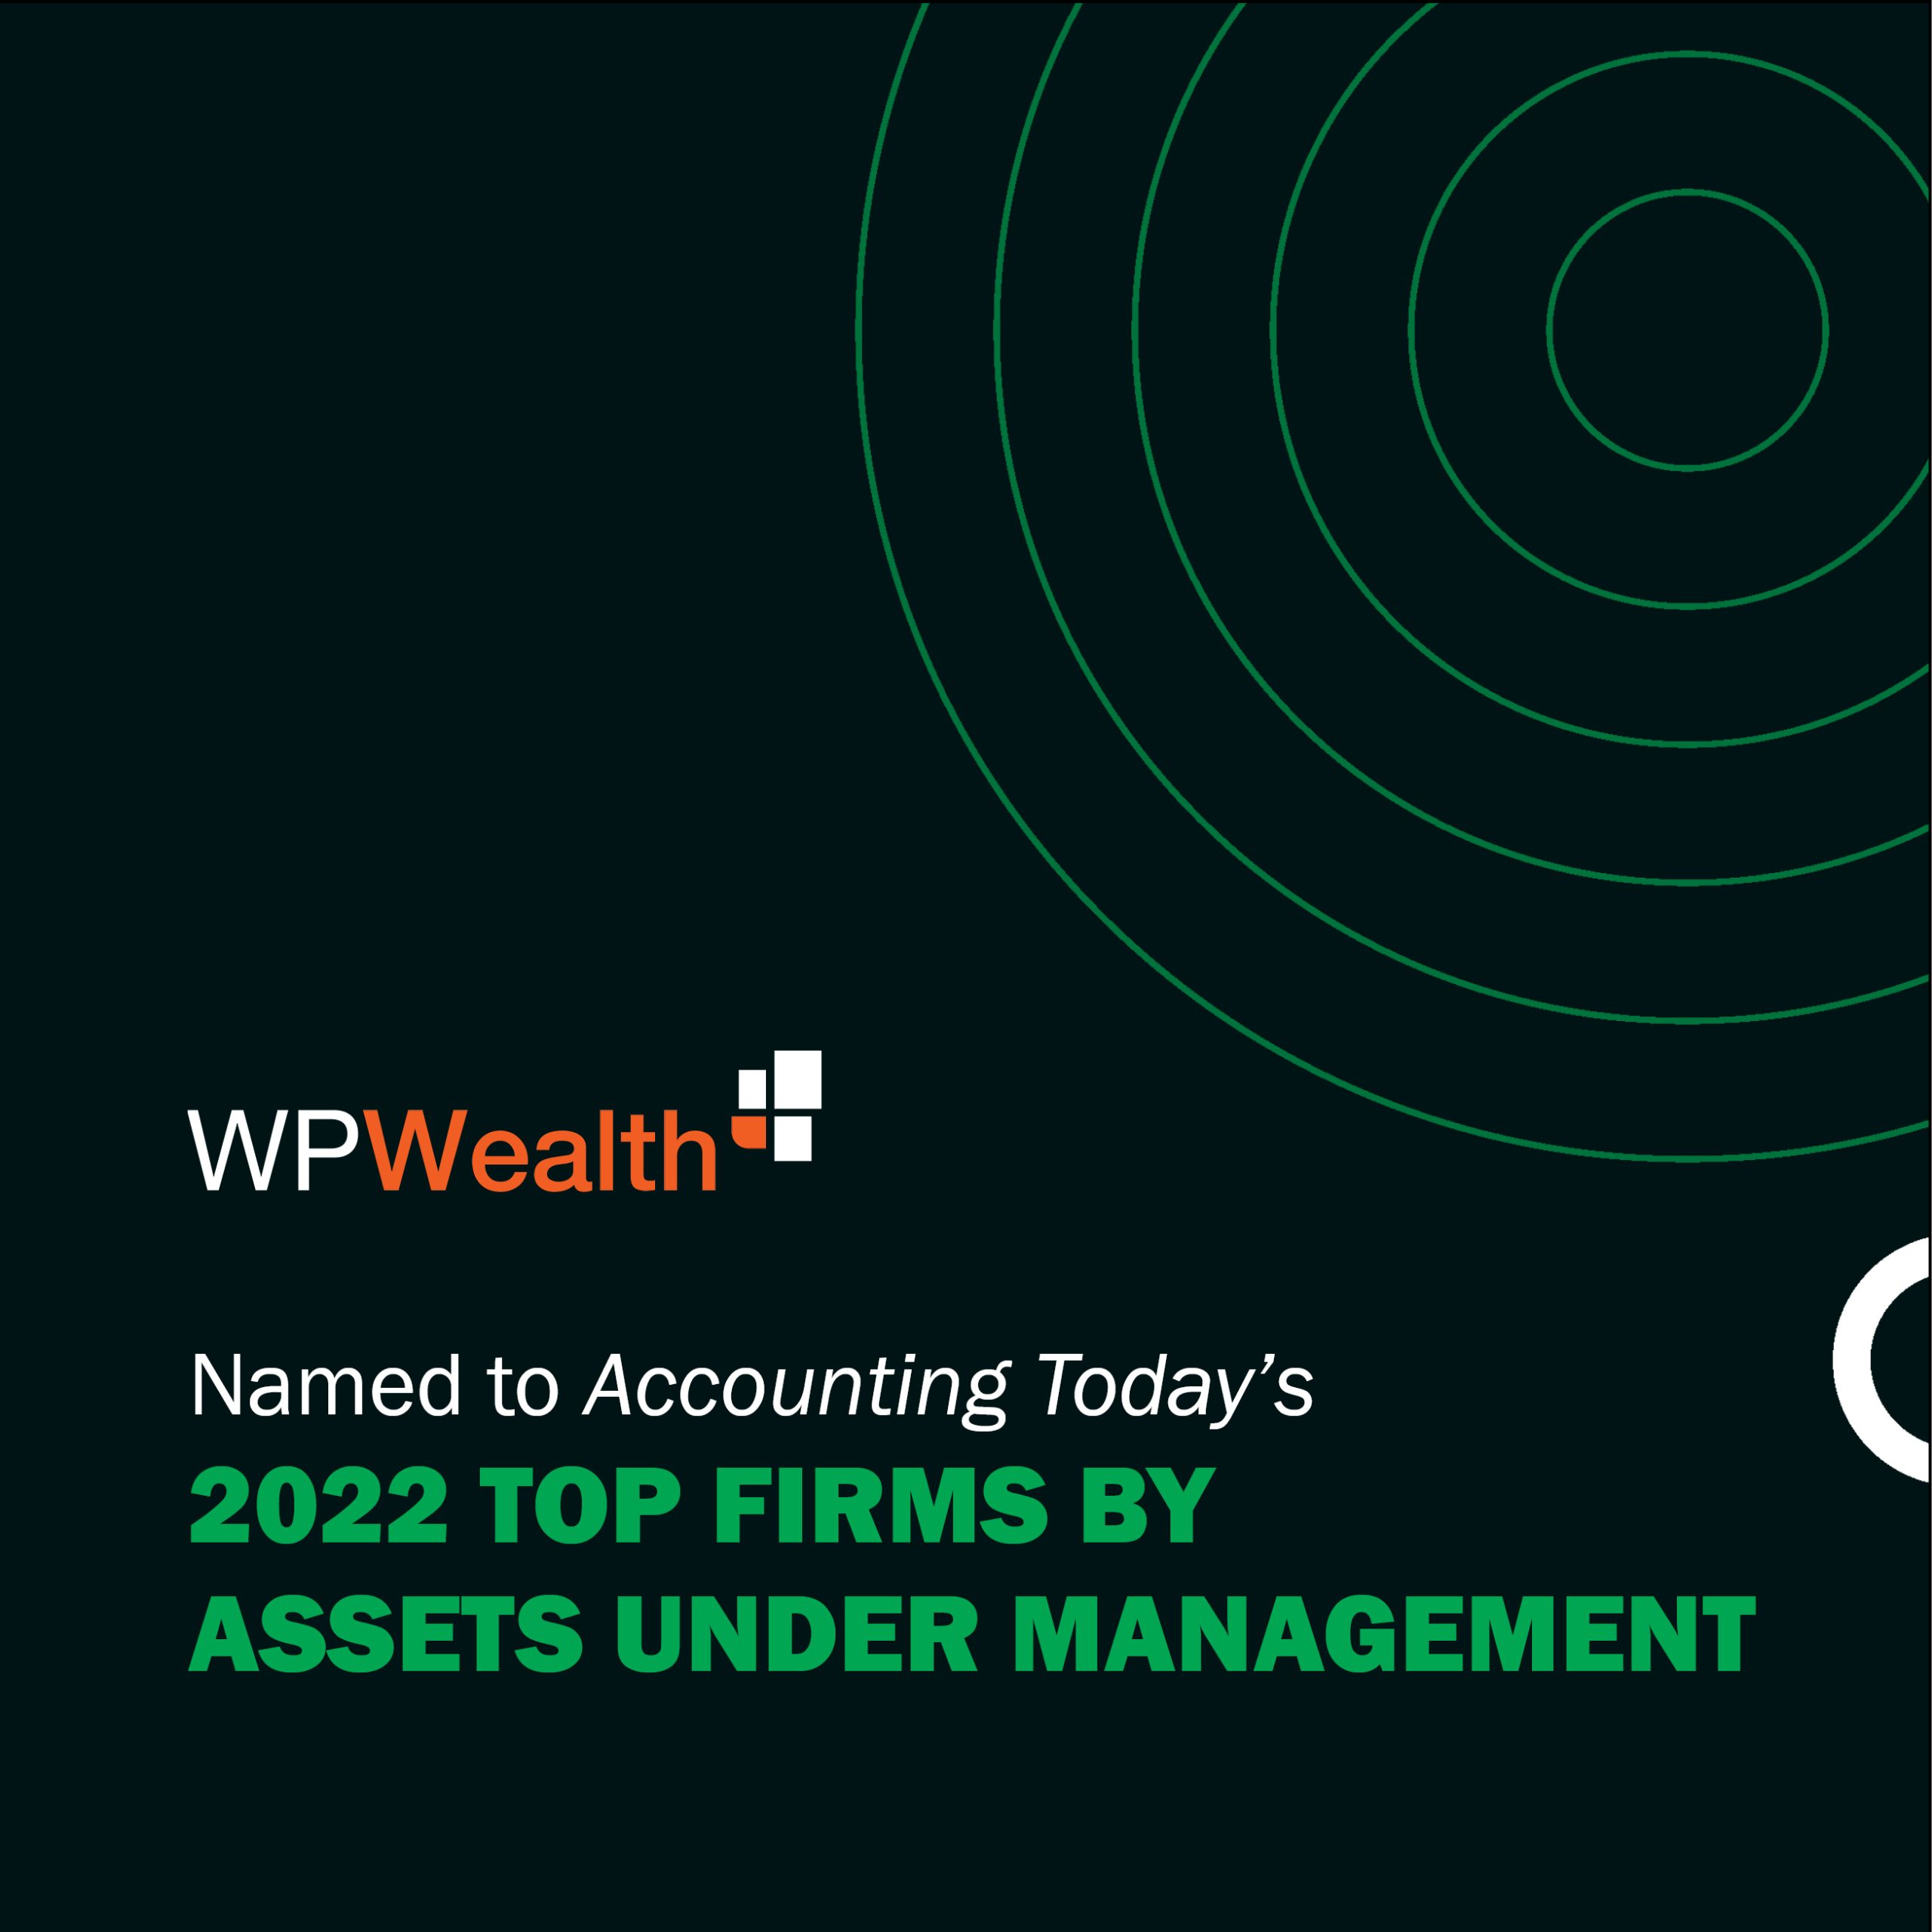 WPWealth named to Accounting Today's 2022 Top Firms